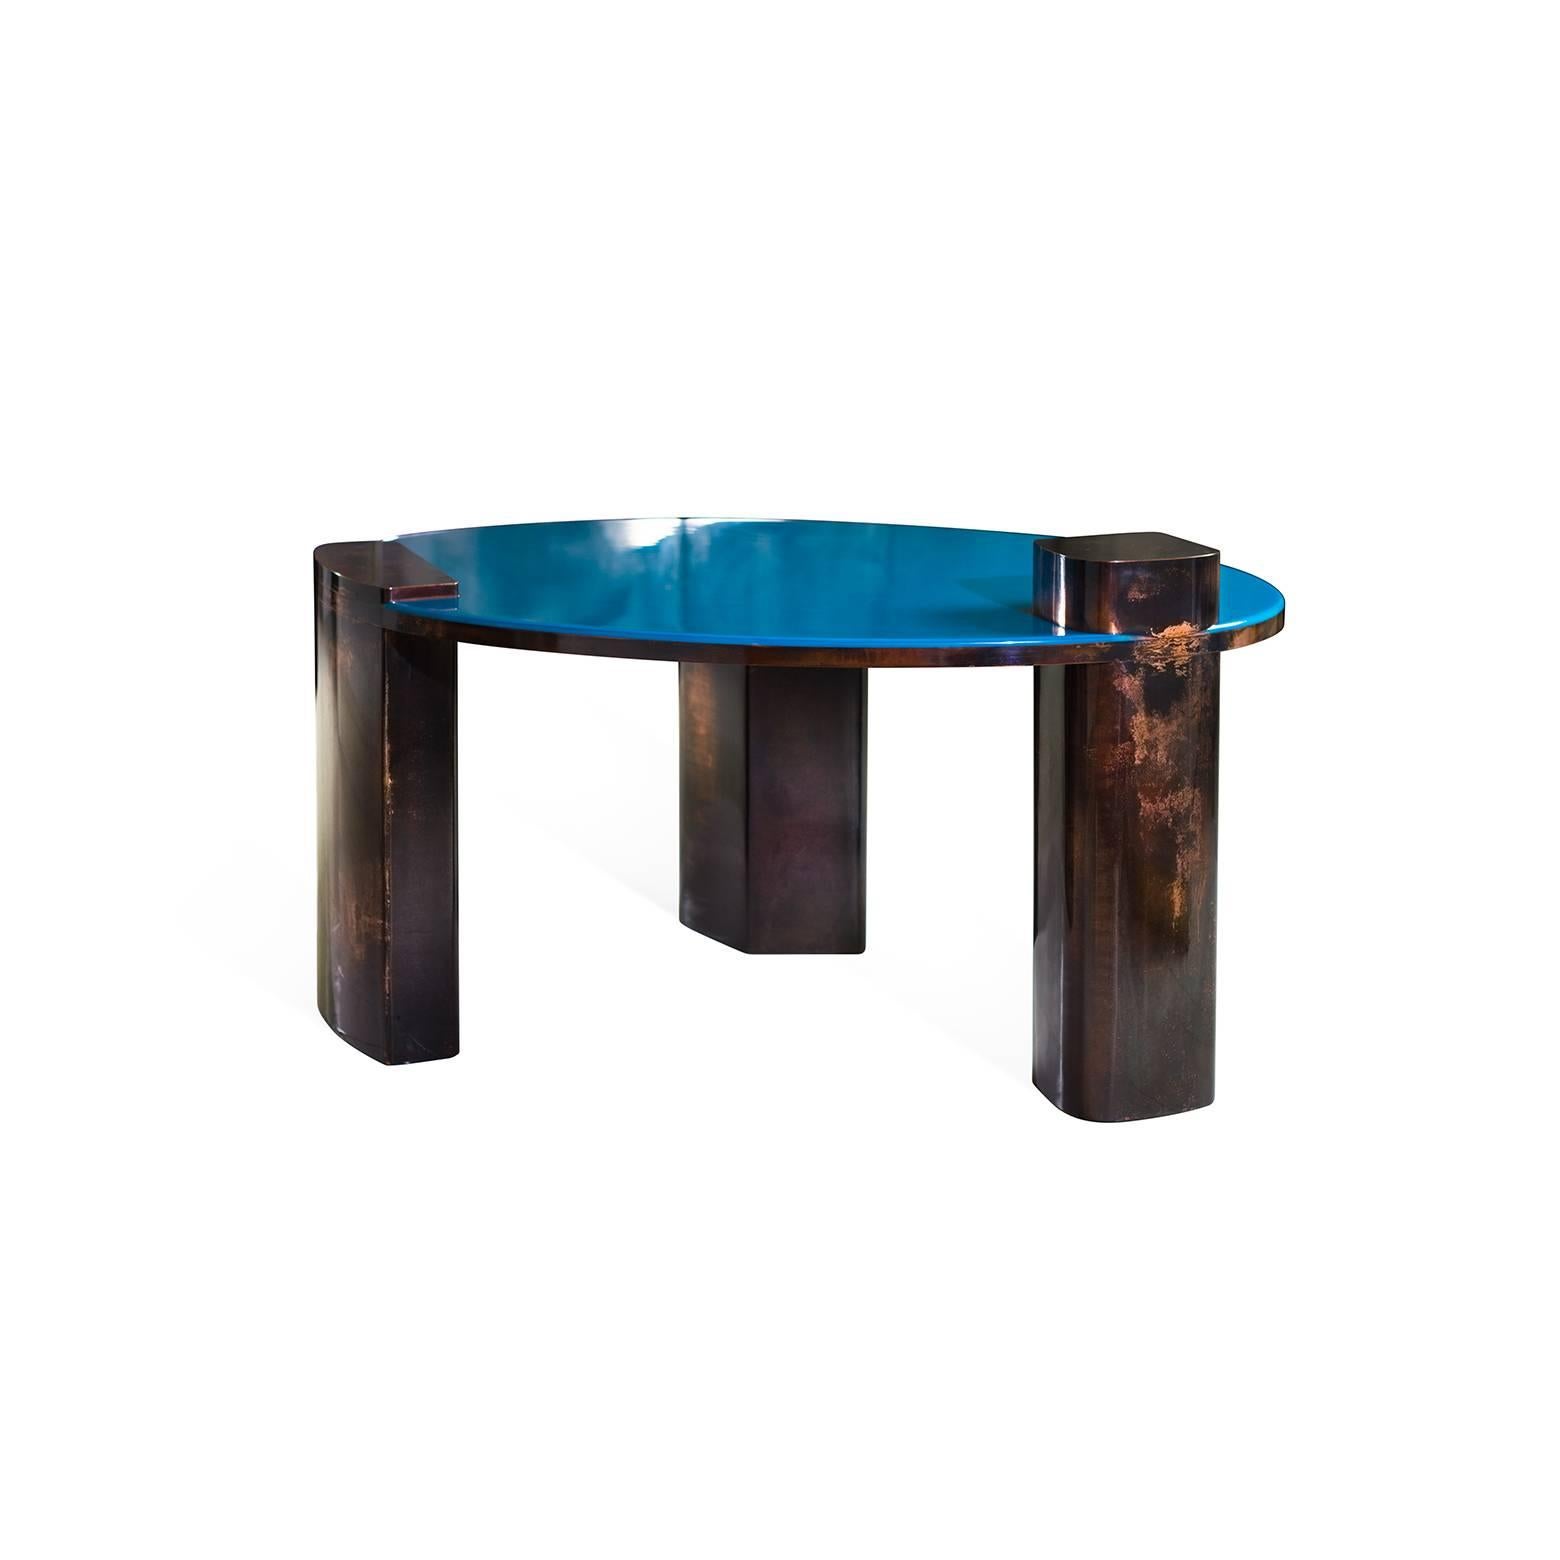 Blue coffee table is undeniably the most breath taking piece in the Moon Series collection. This copper table delights by the depth of its blue resin top and meticulous details of its hand patinated base. Limited edition of eight pieces.
Galerie